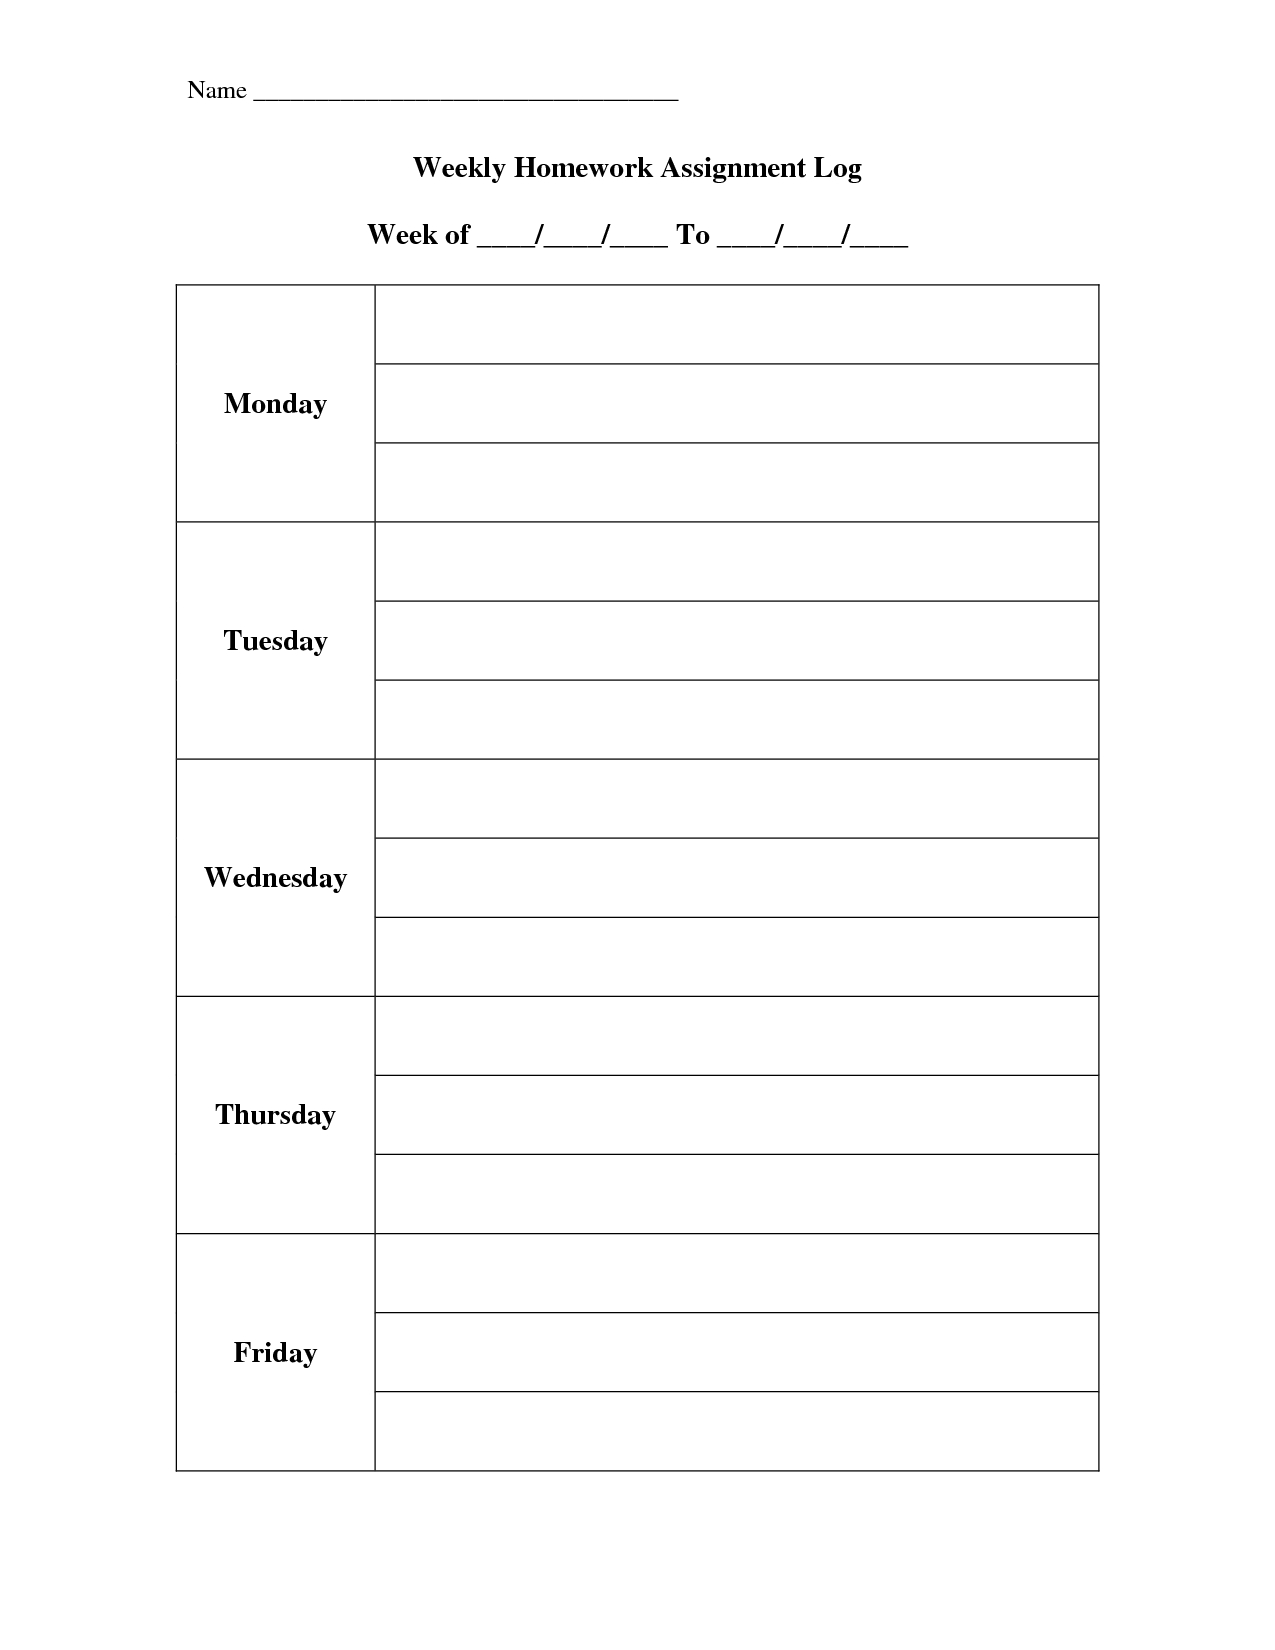 Primary Homework Assignment Sheets | Weekly Homework  Weekly Assignment Log